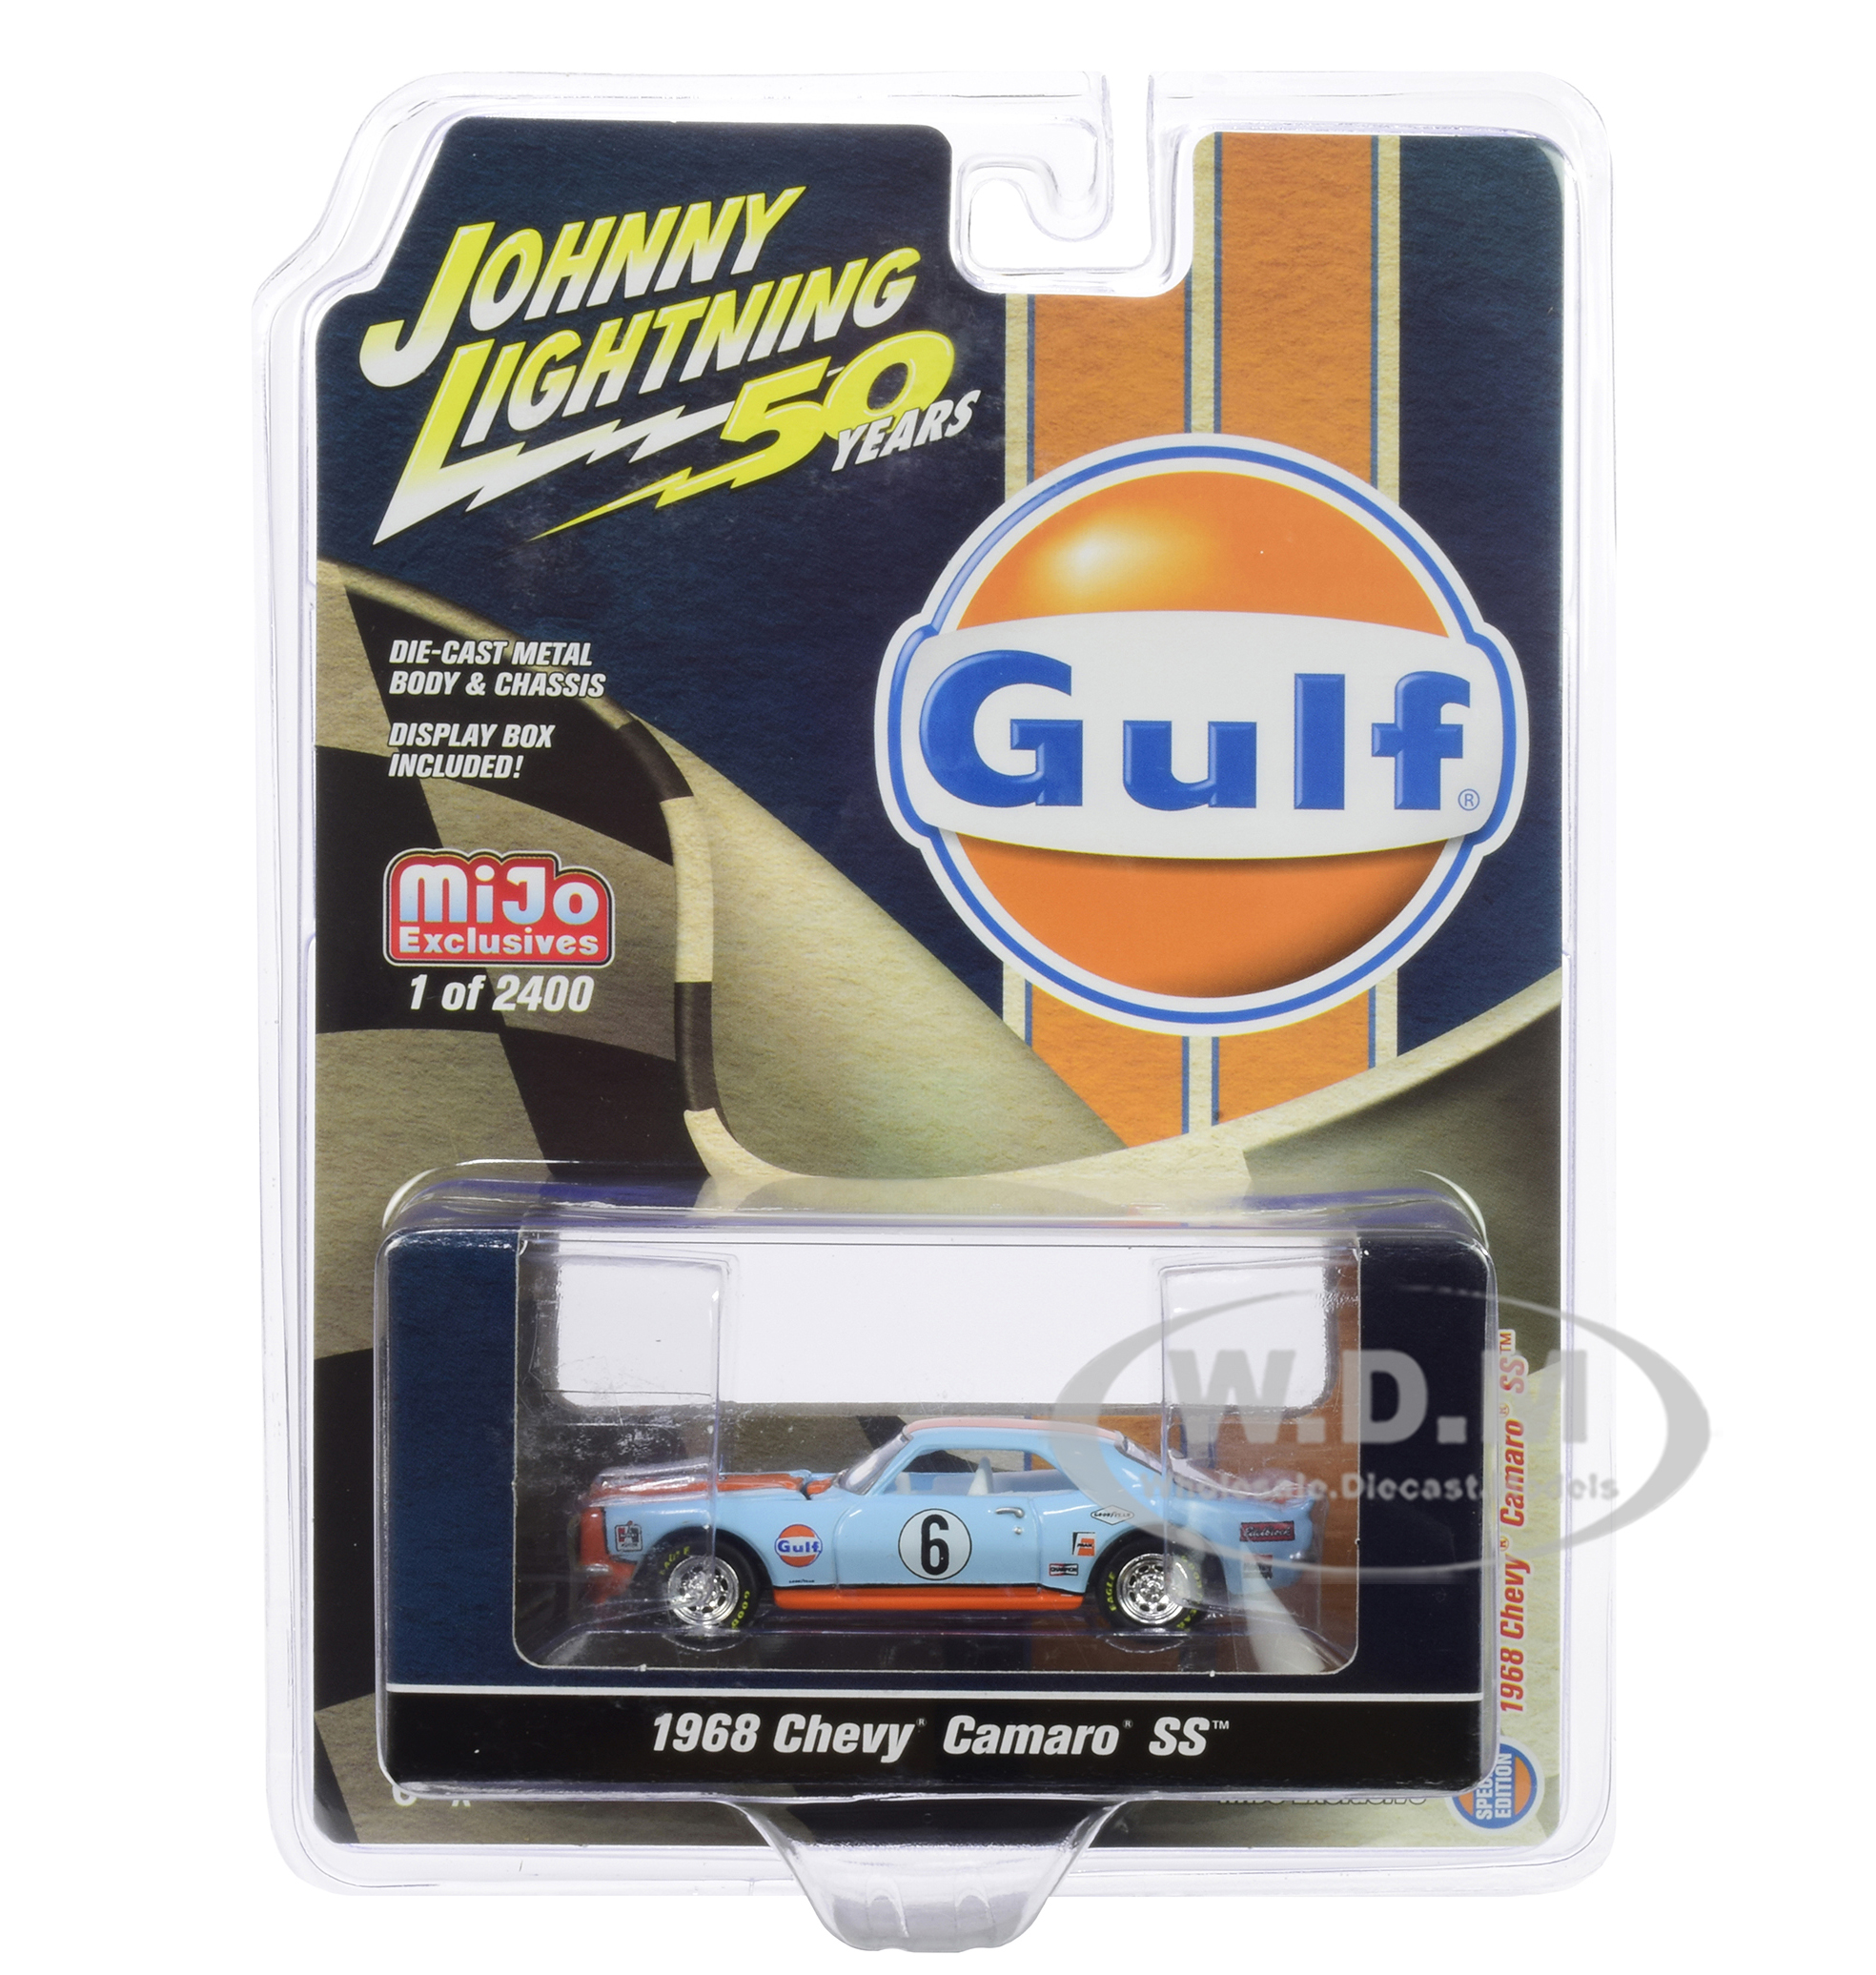 1968 Chevrolet Camaro Ss 6 "gulf Oil" Light Blue And Orange Limited Edition To 2400 Pieces Worldwide 1/64 Diecast Model Car By Johnny Lightning